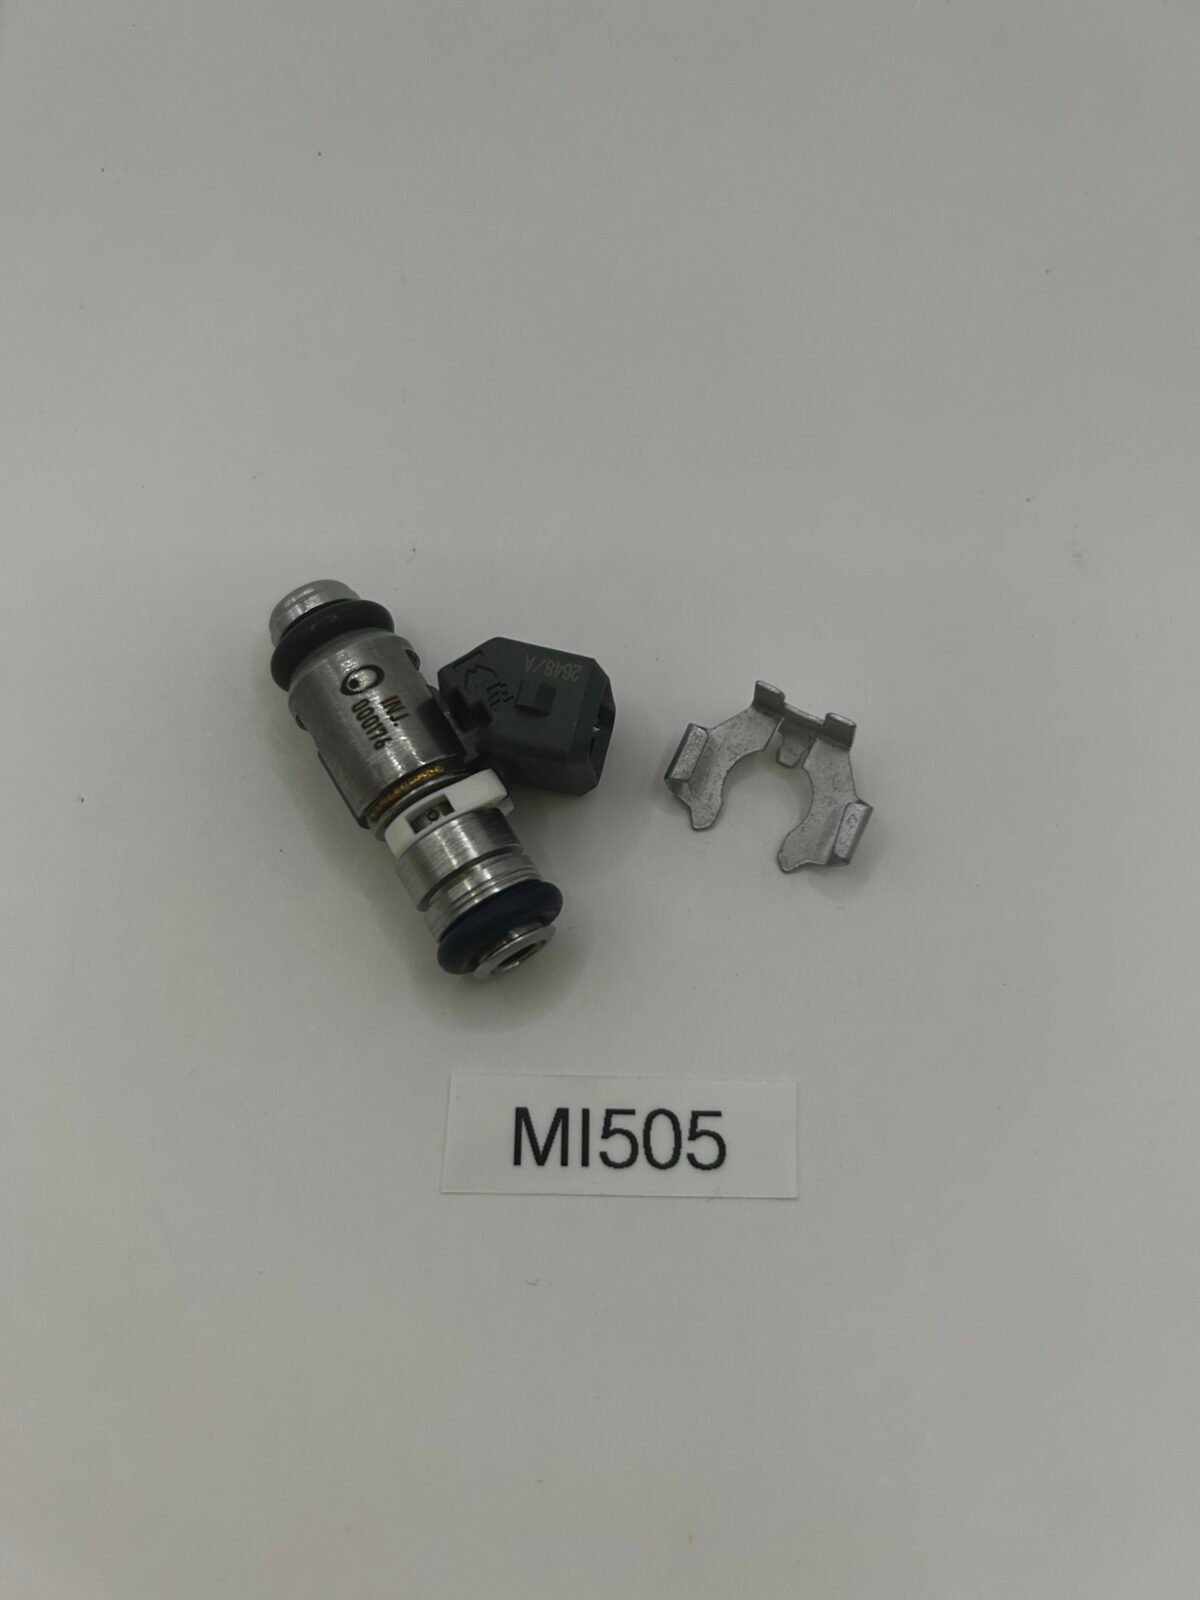 MI505 MosterEFI Injector with Fixing Clip